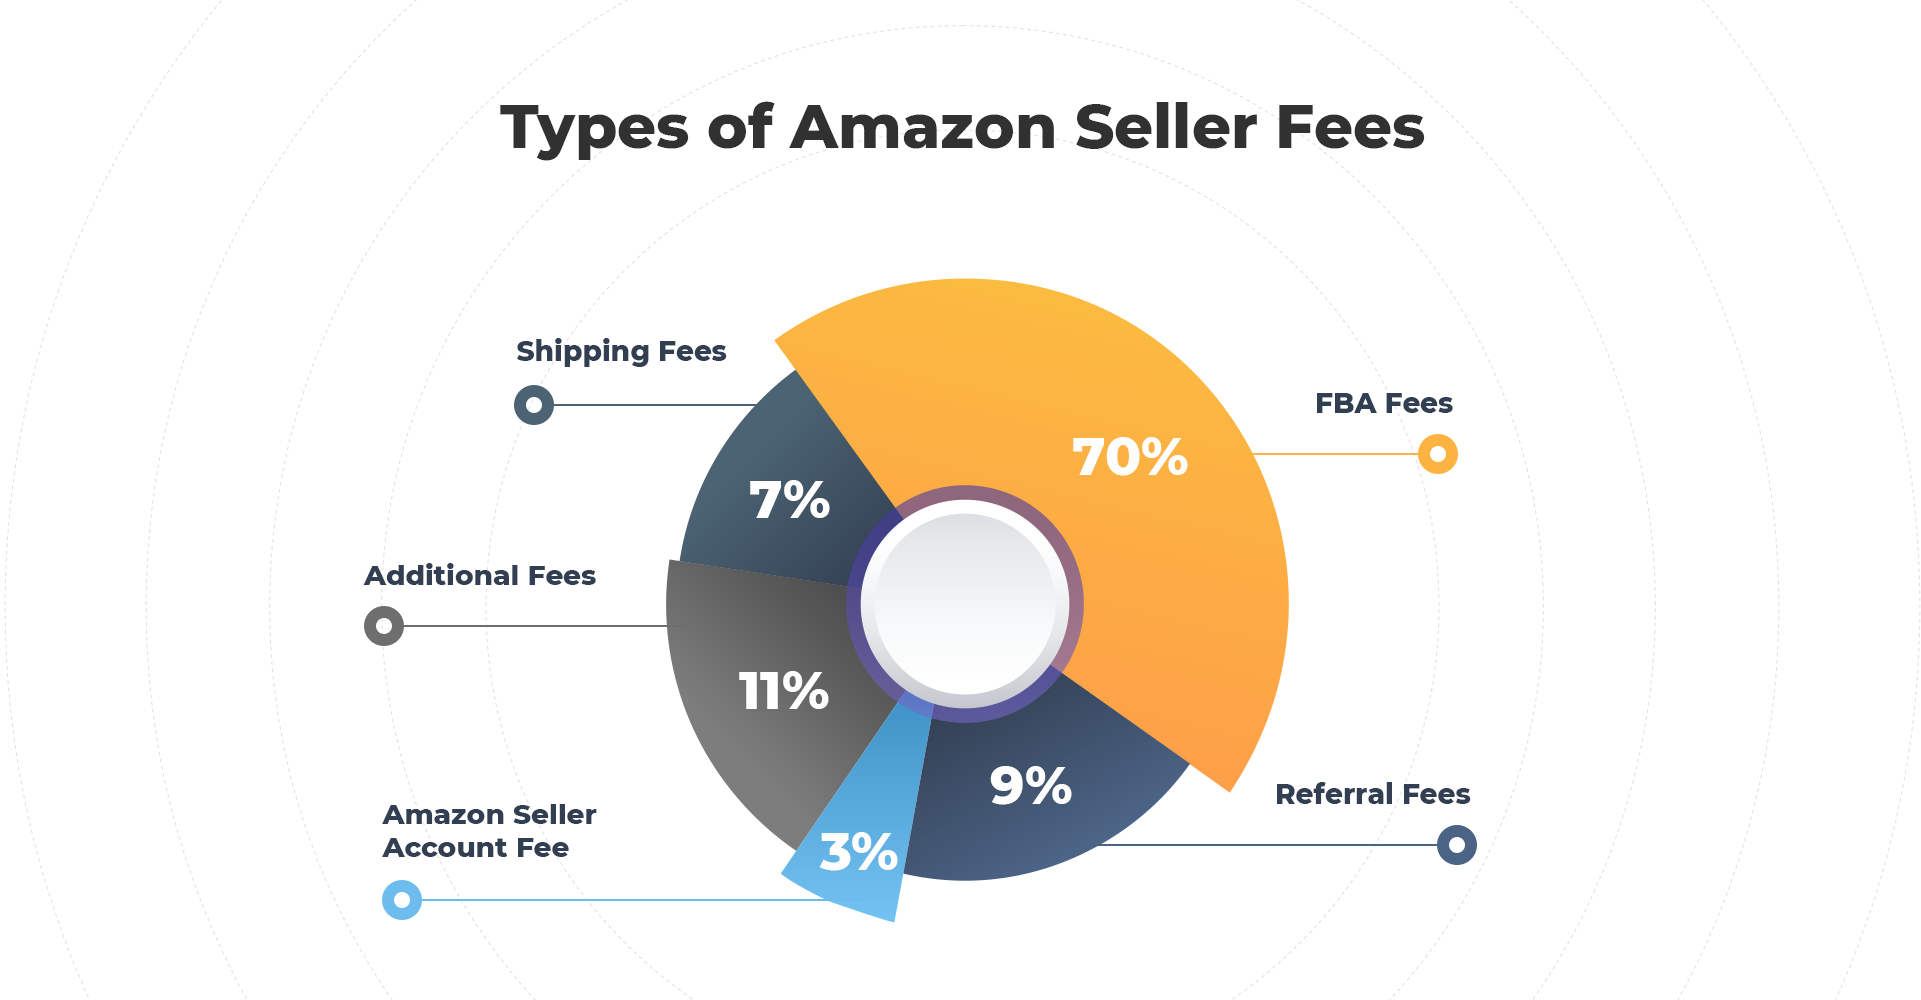 Amazon Seller Fees What they Are, and How to Calculate